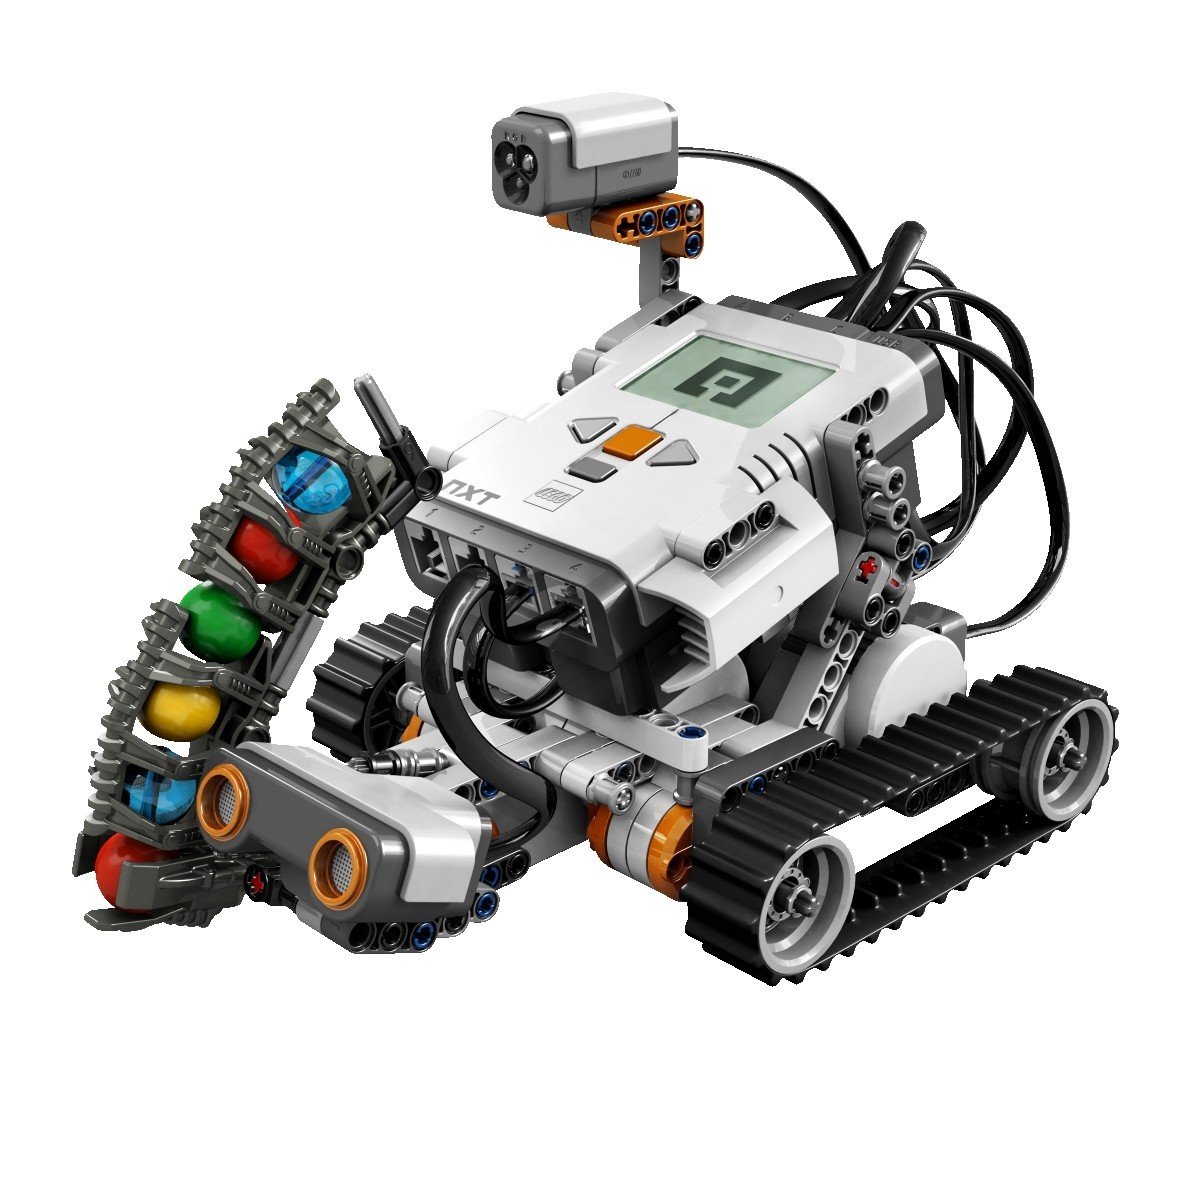 LEGO discontinues Mindstorms product line - The Robot Report